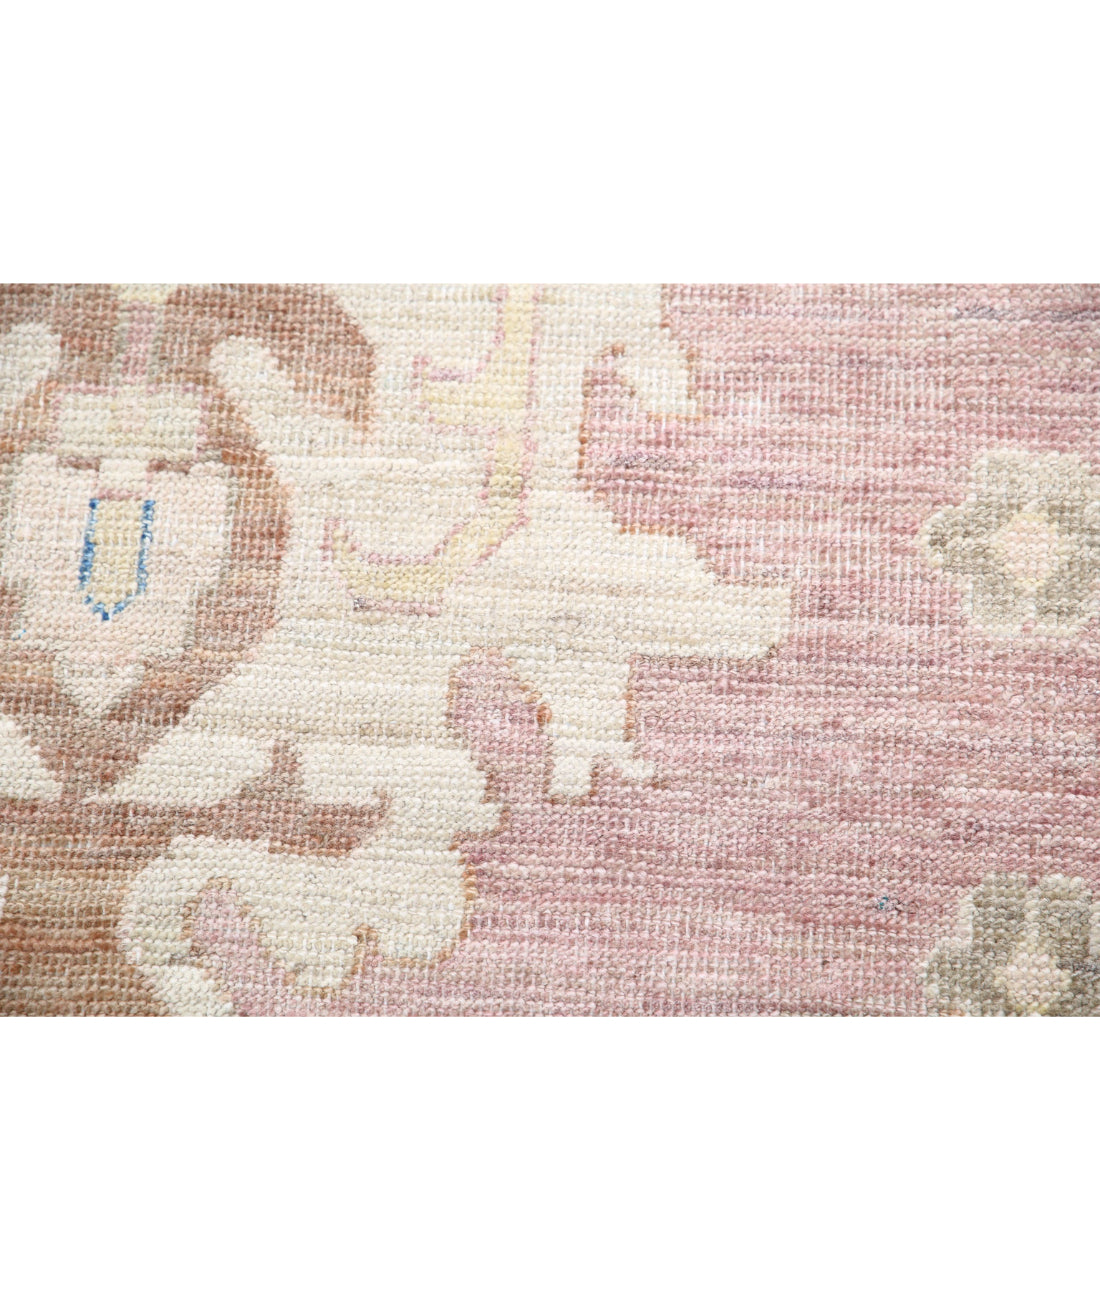 Hand Knotted Serenity Wool Rug - 9'10'' x 13'4'' 9'10'' x 13'4'' (295 X 400) / Brown / Ivory